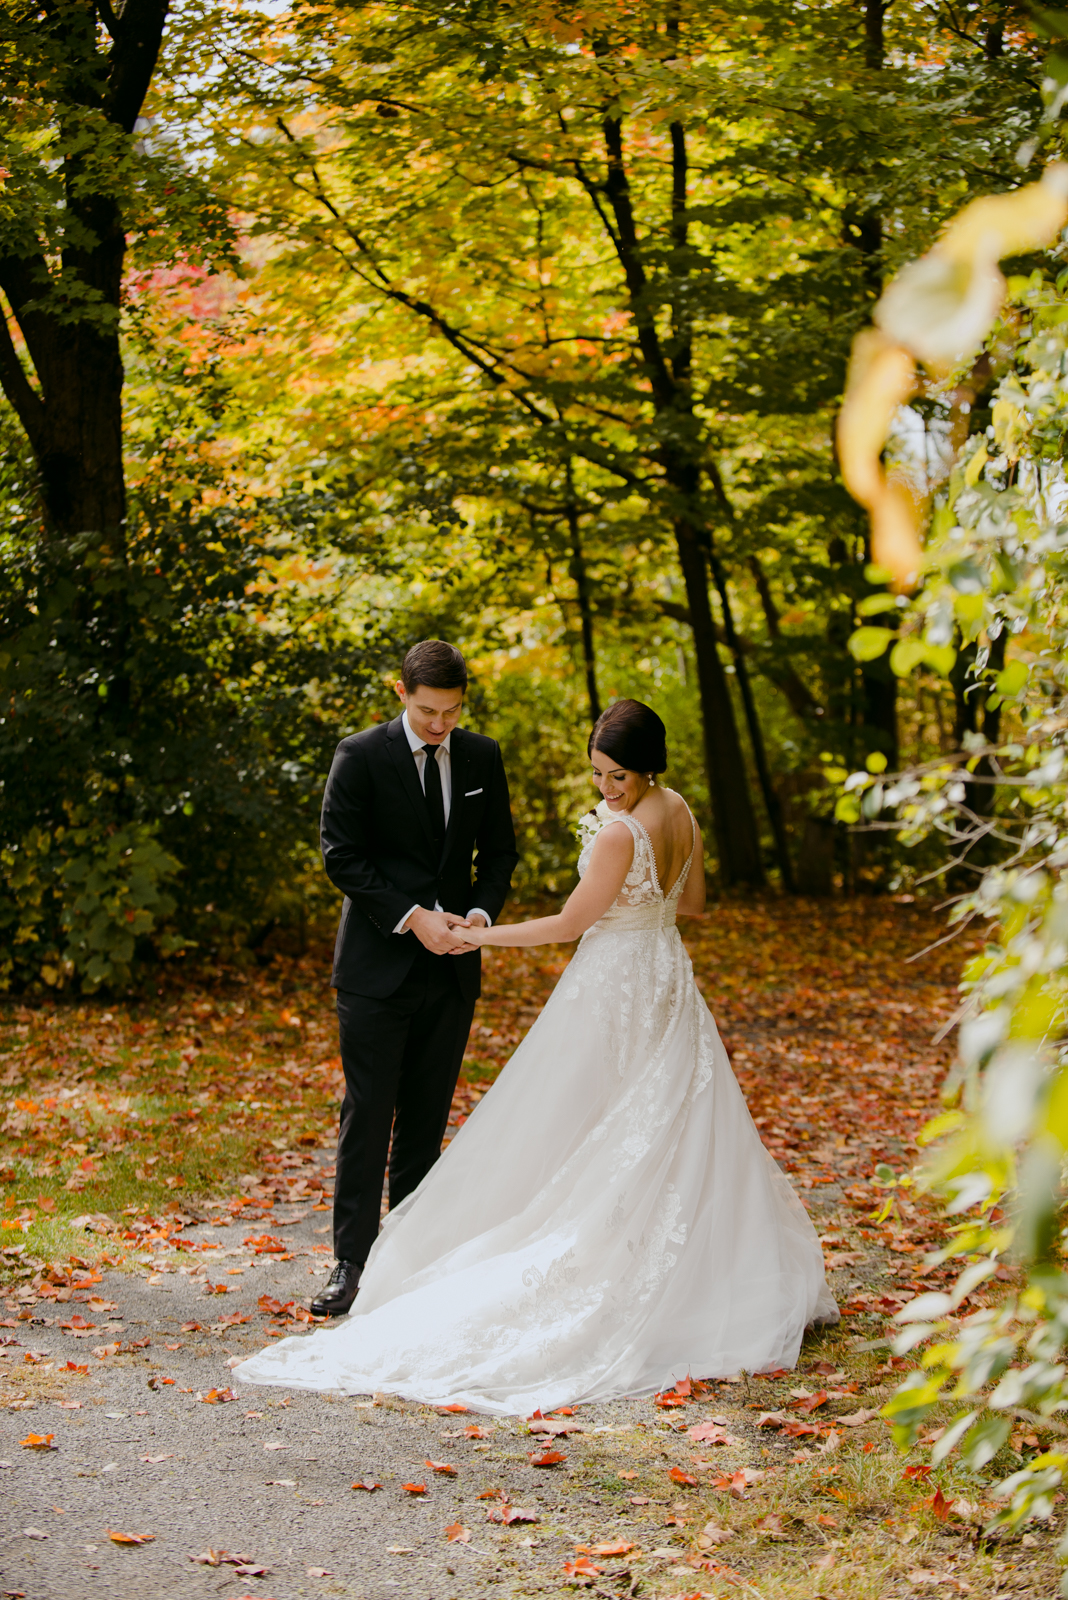 groom checking out the bride's dress on path with fall coloured leaves